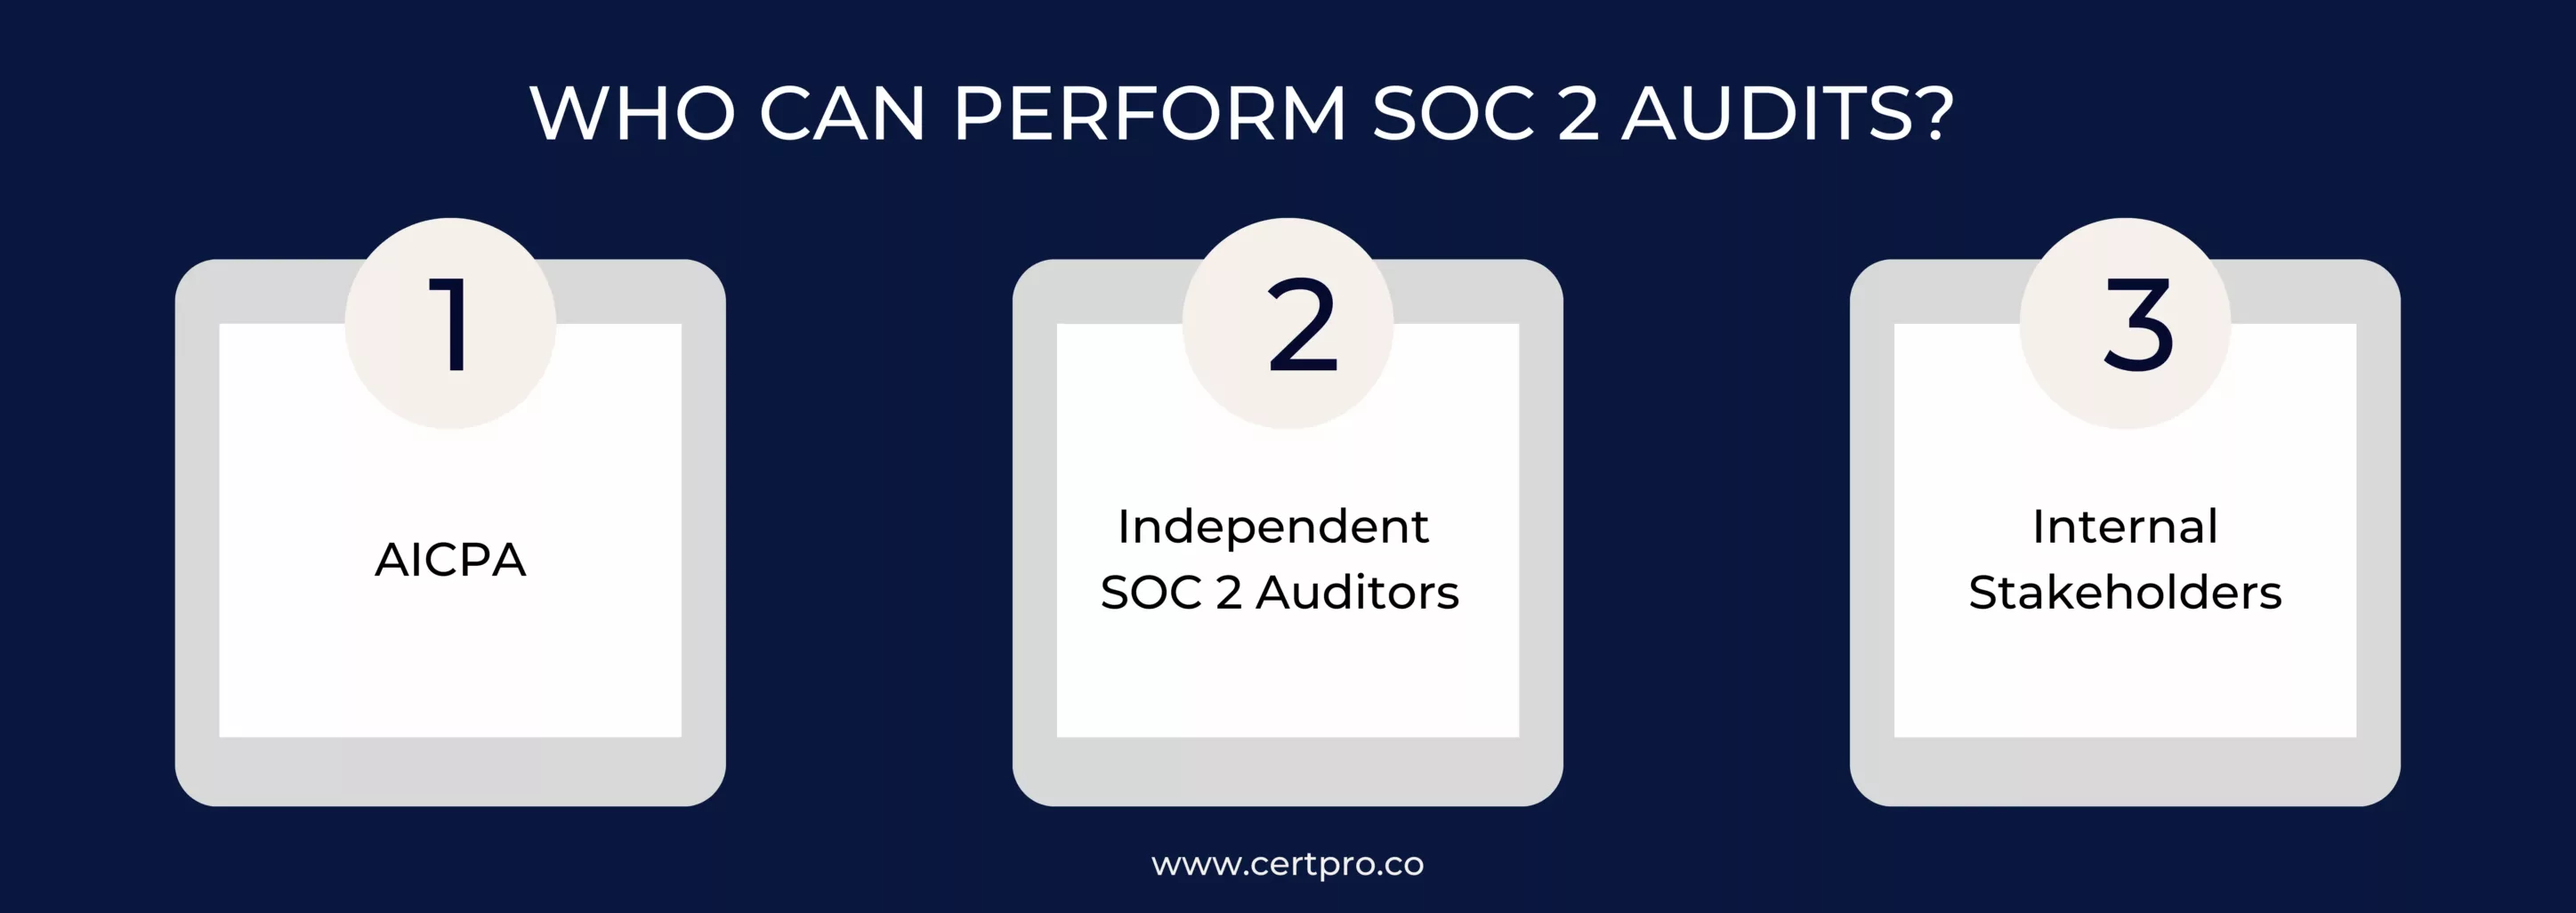 WHO CAN PERFORM SOC 2 AUDITS